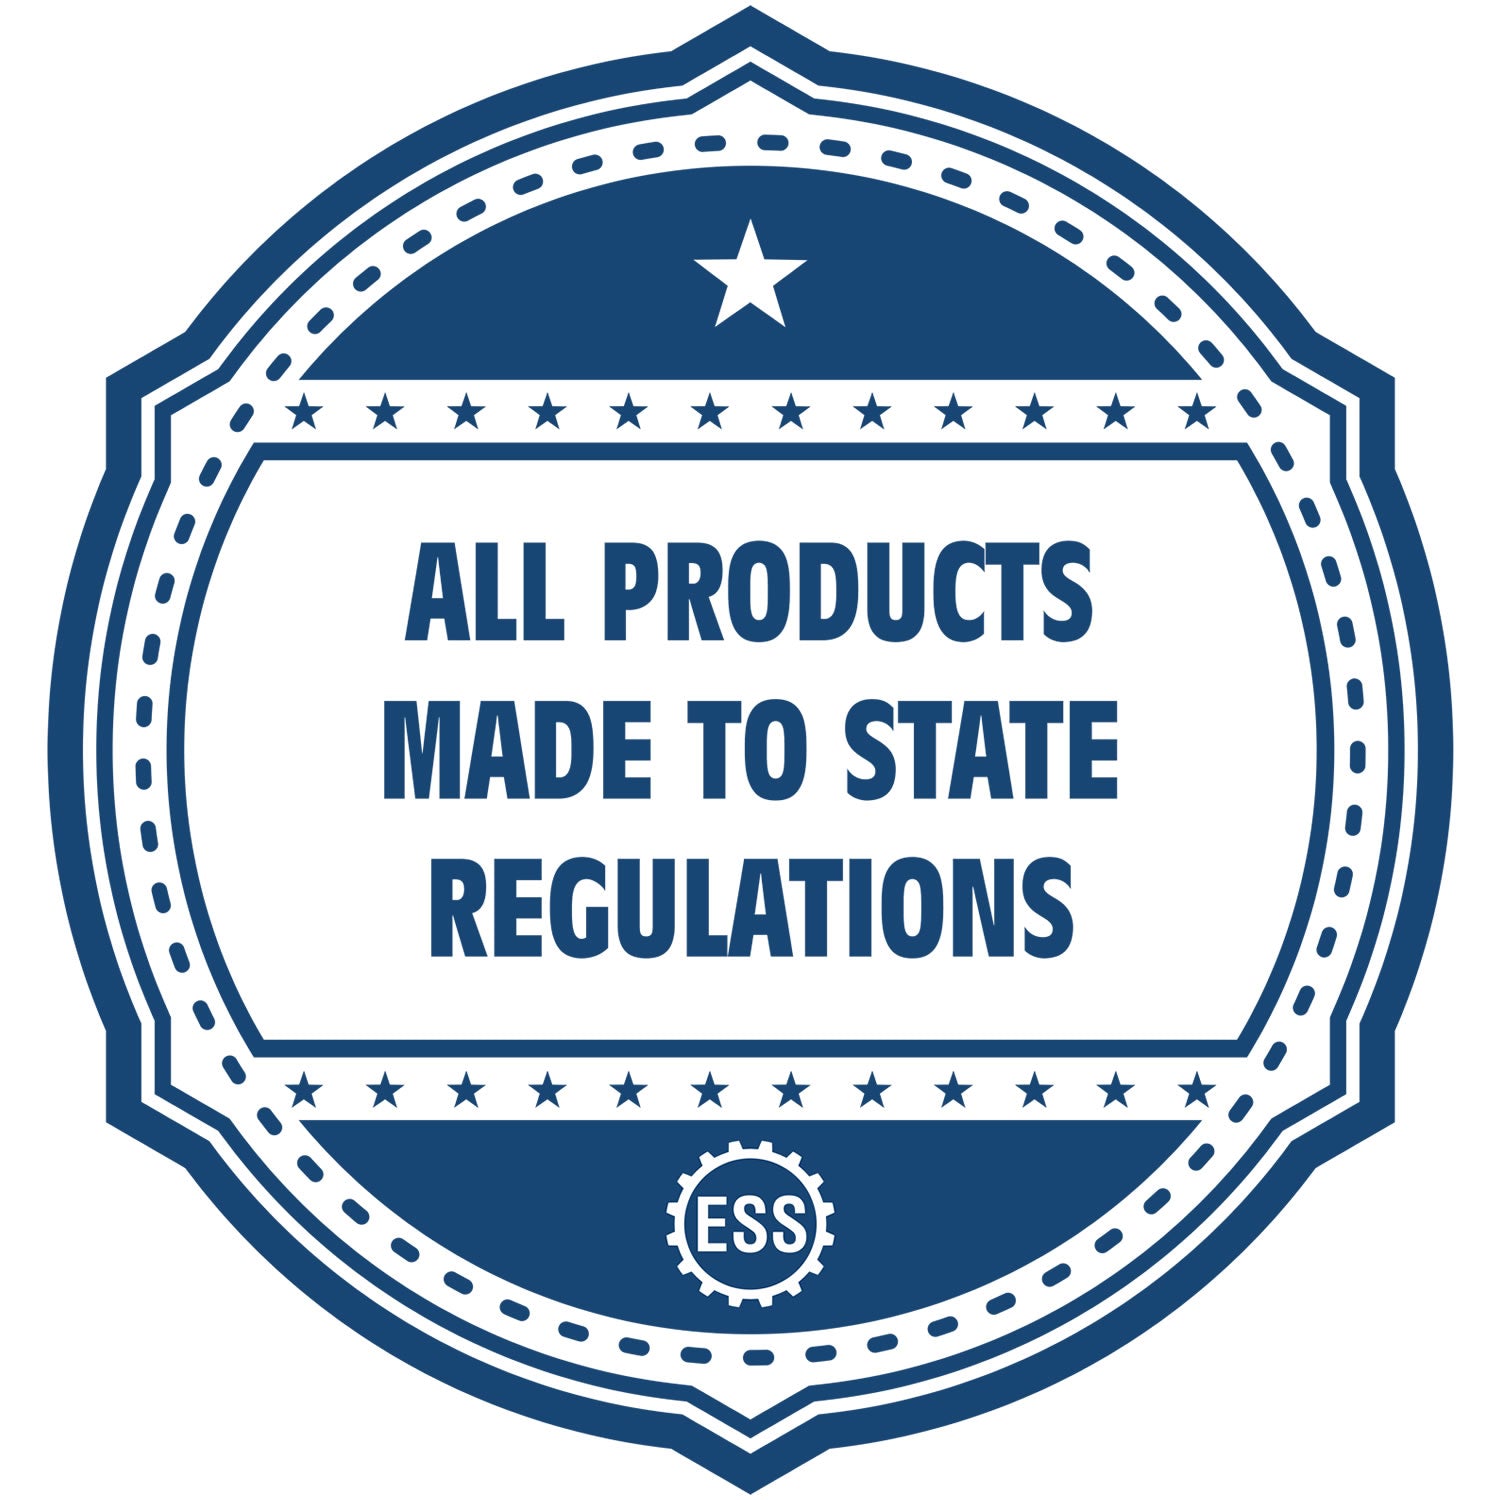 An icon or badge element for the Tennessee Desk Surveyor Seal Embosser showing that this product is made in compliance with state regulations.